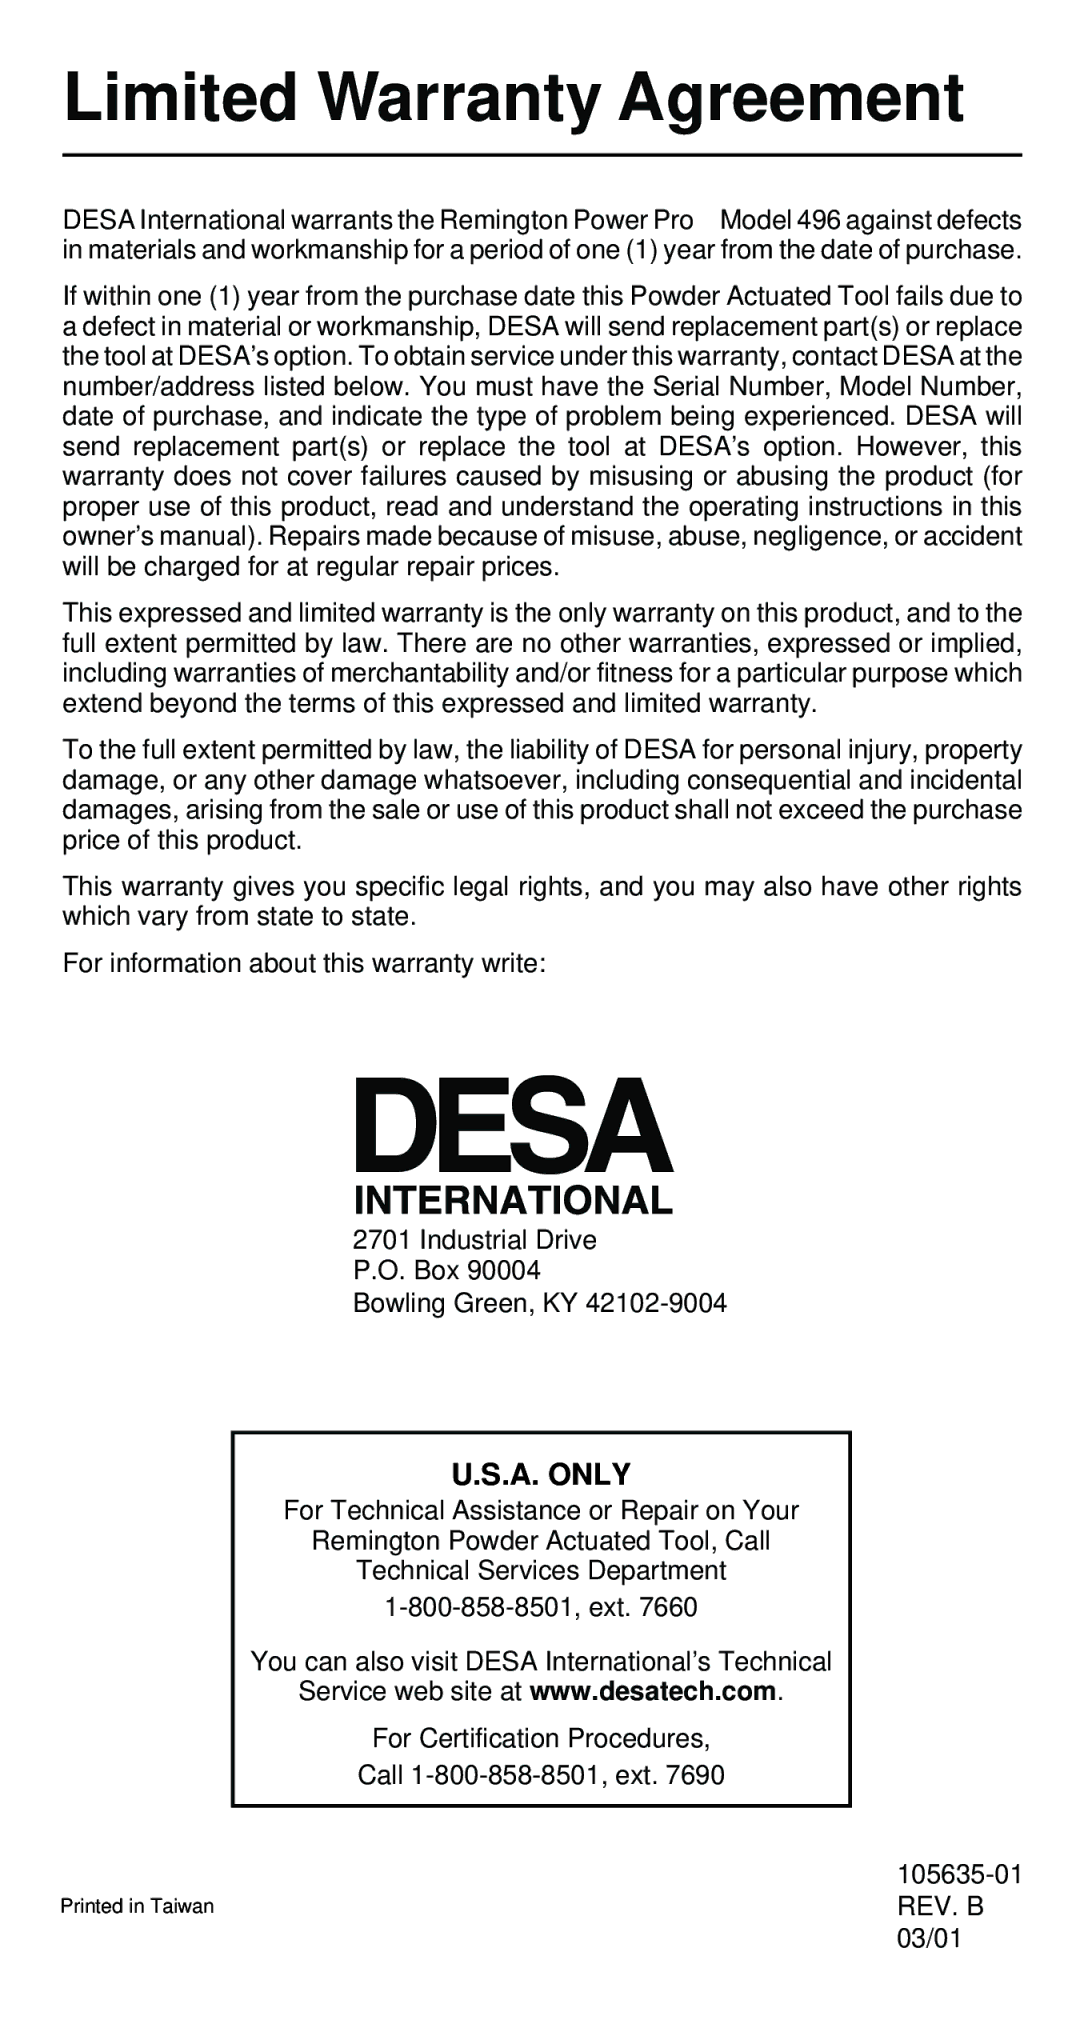 Desa 496 operating instructions Limited Warranty Agreement, A. only 